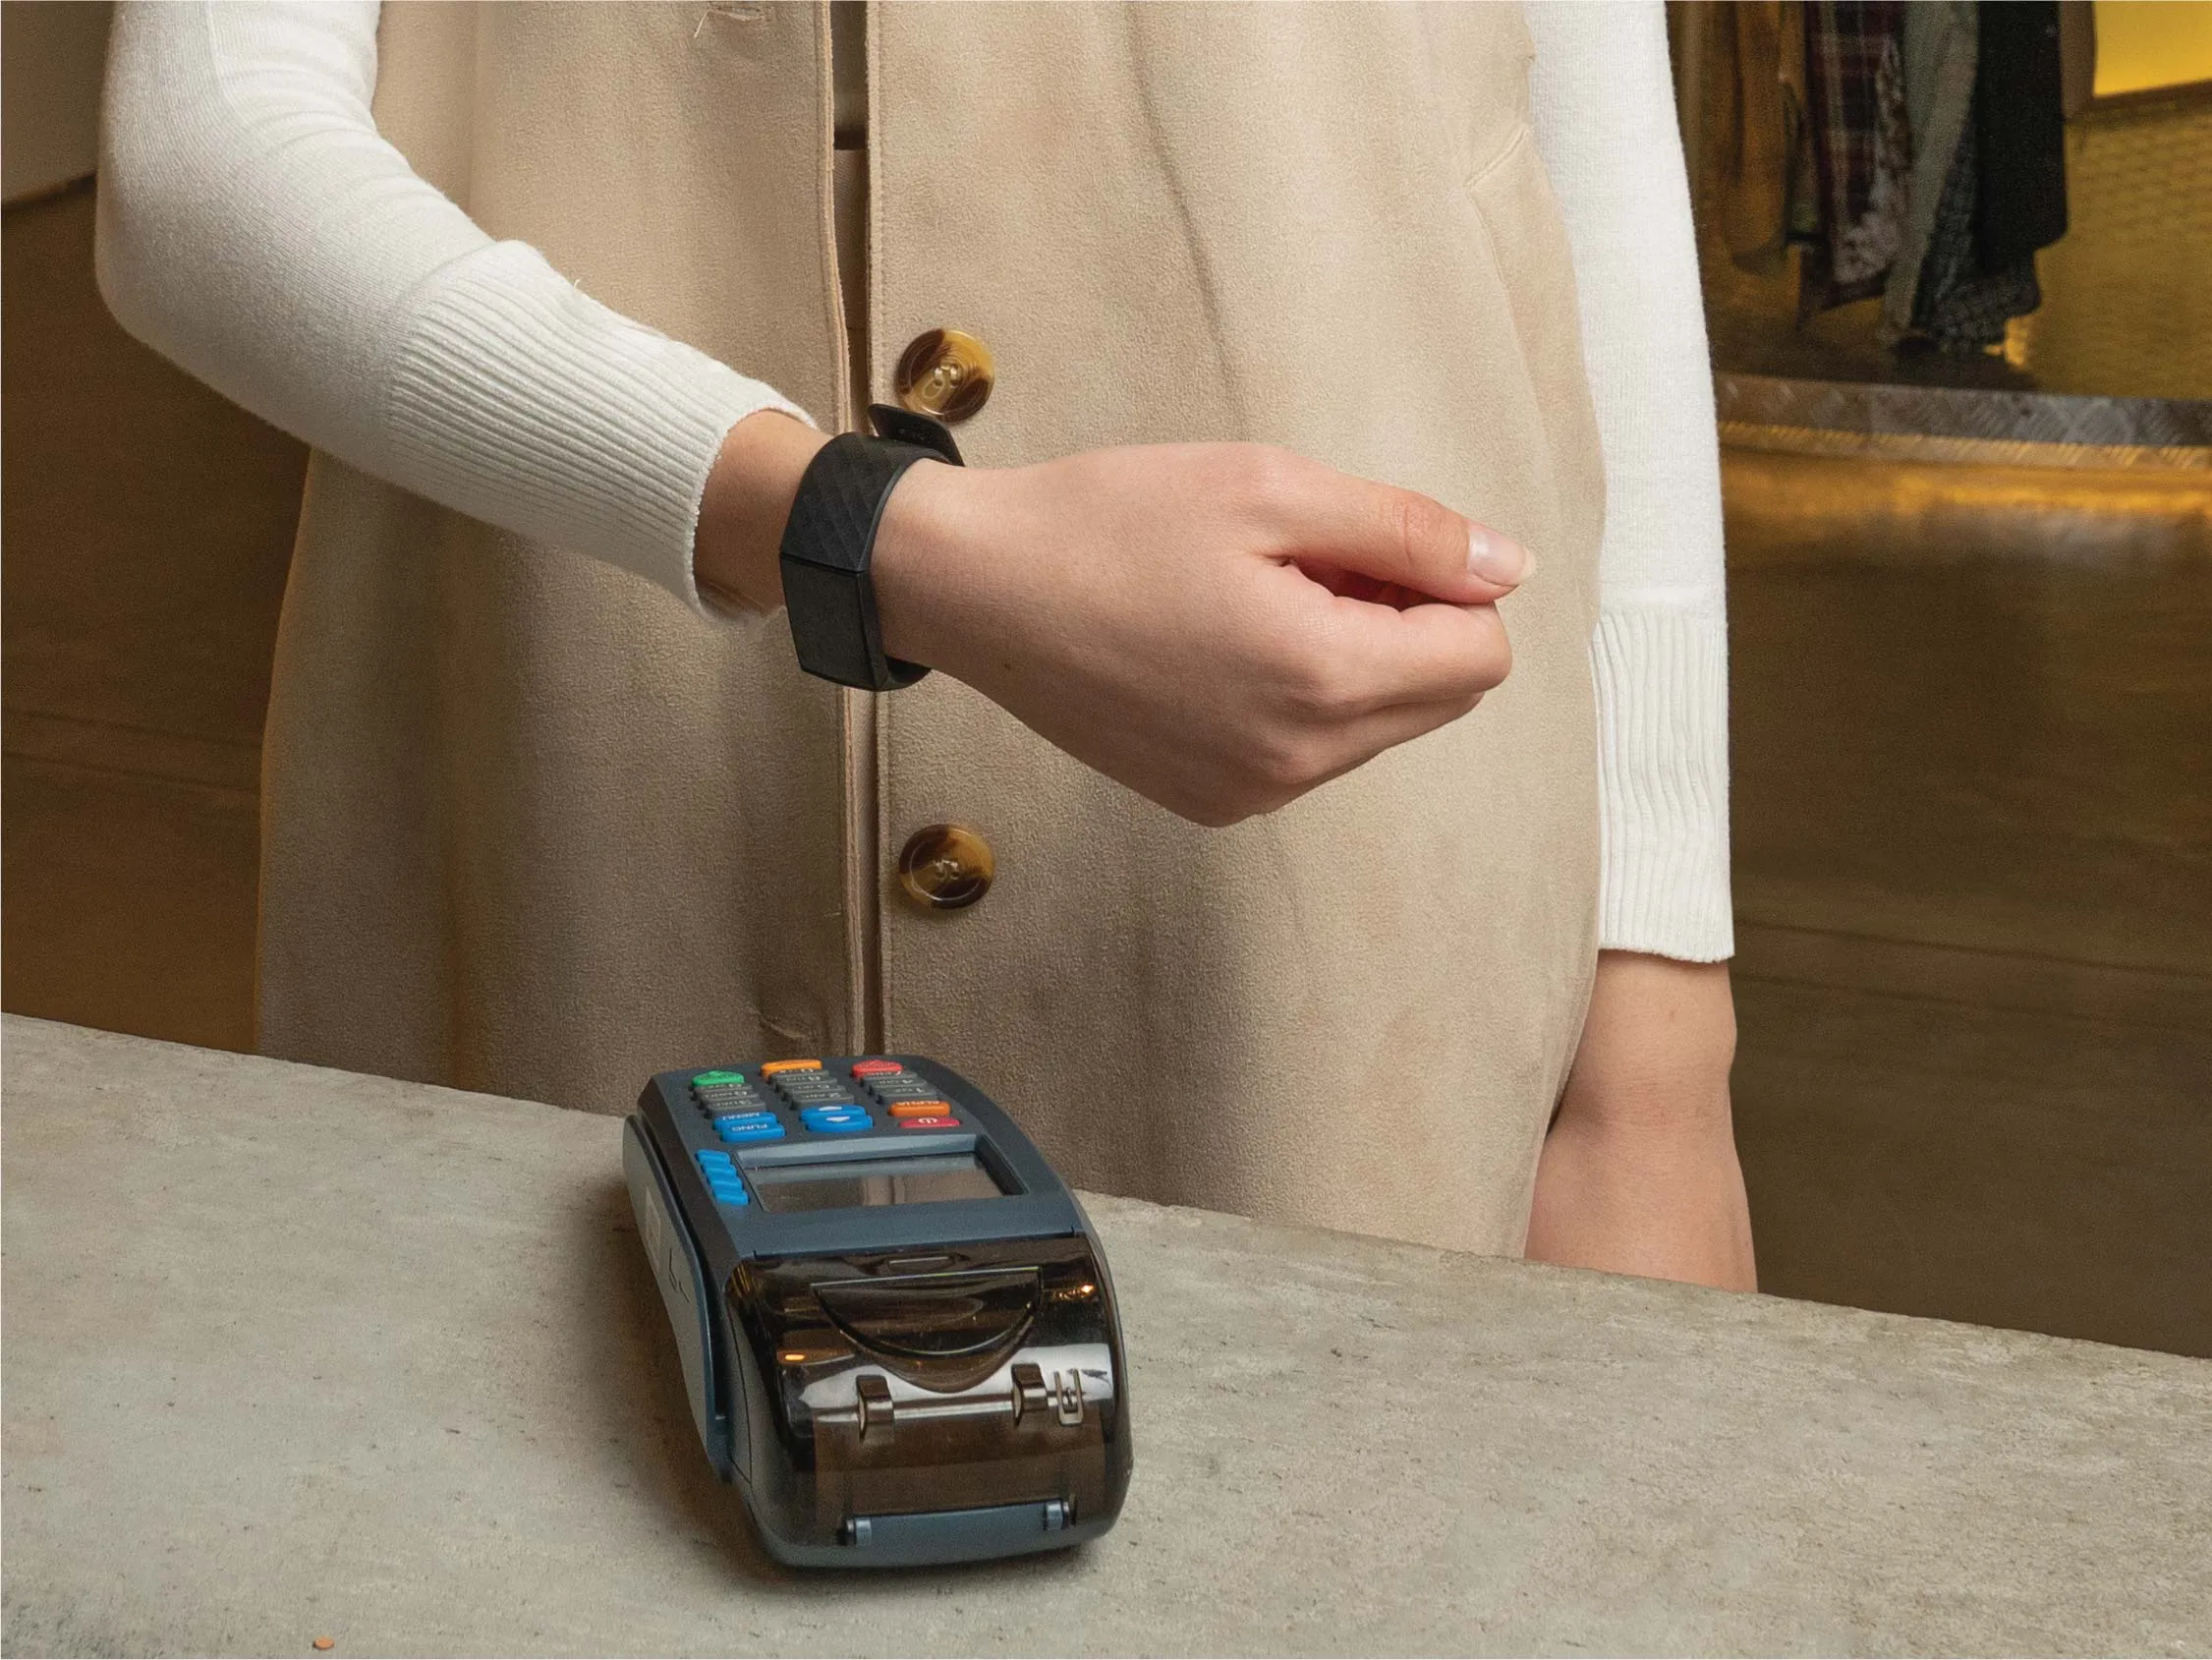 A lady pays via NFC technology using UTap services from her smartwatch app